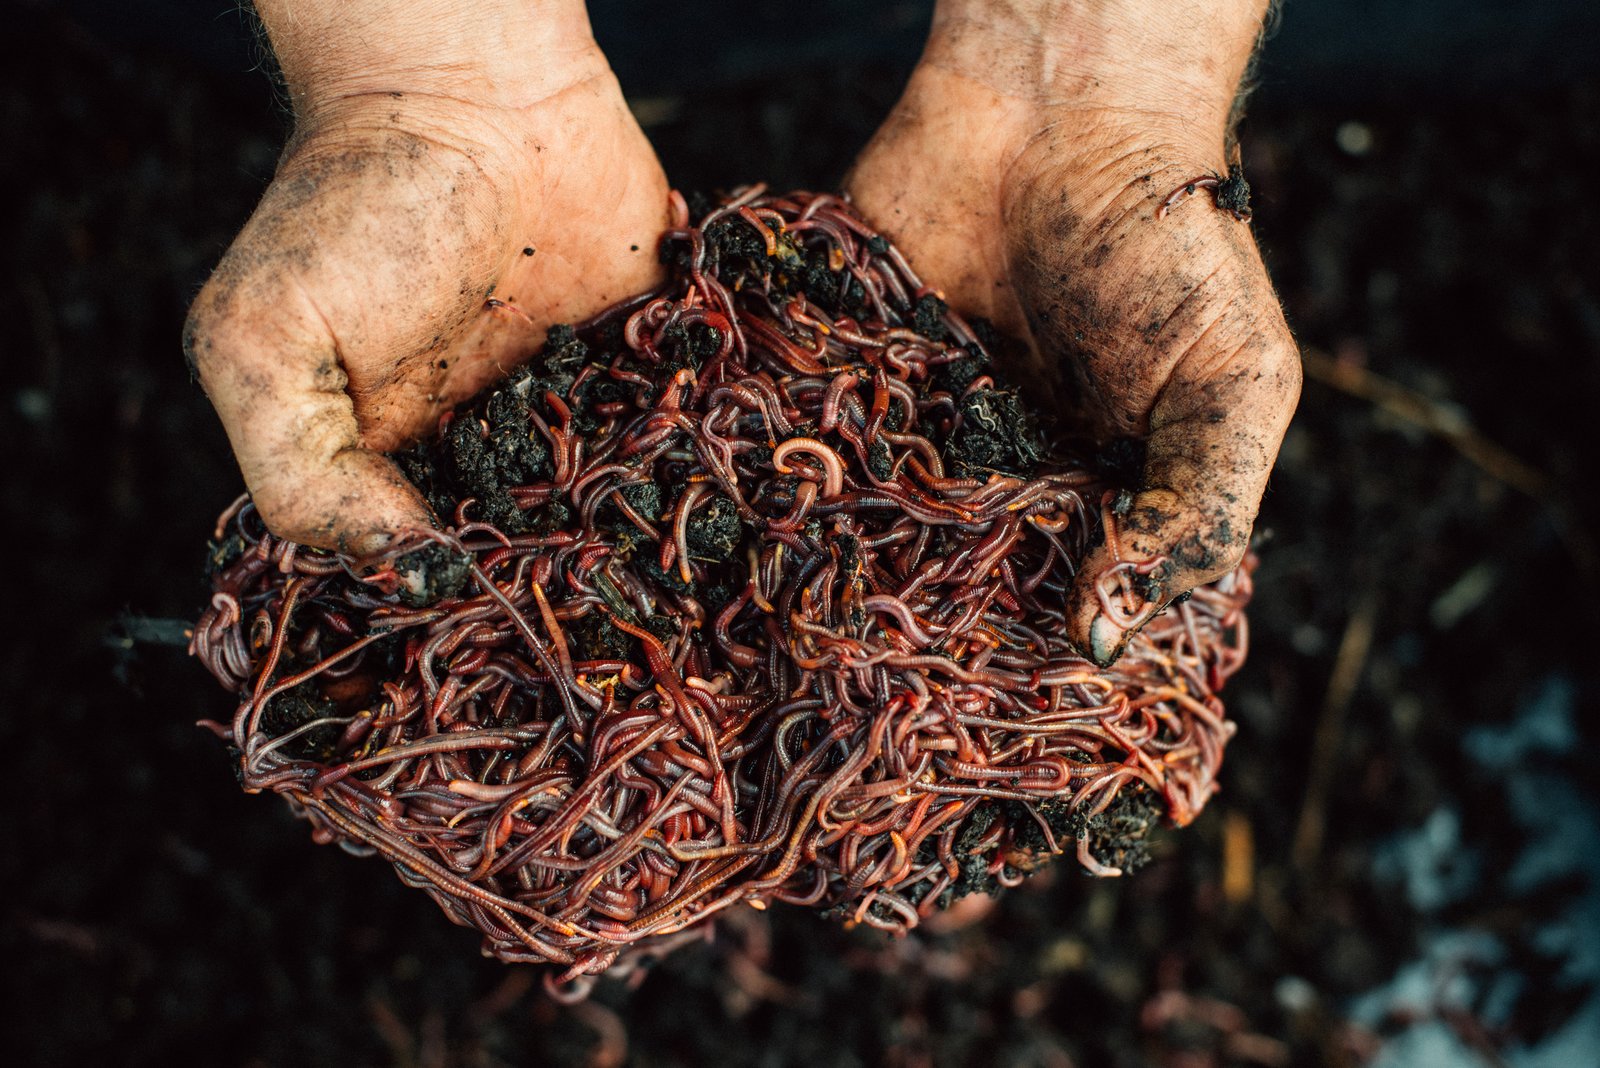 download best worms for composting